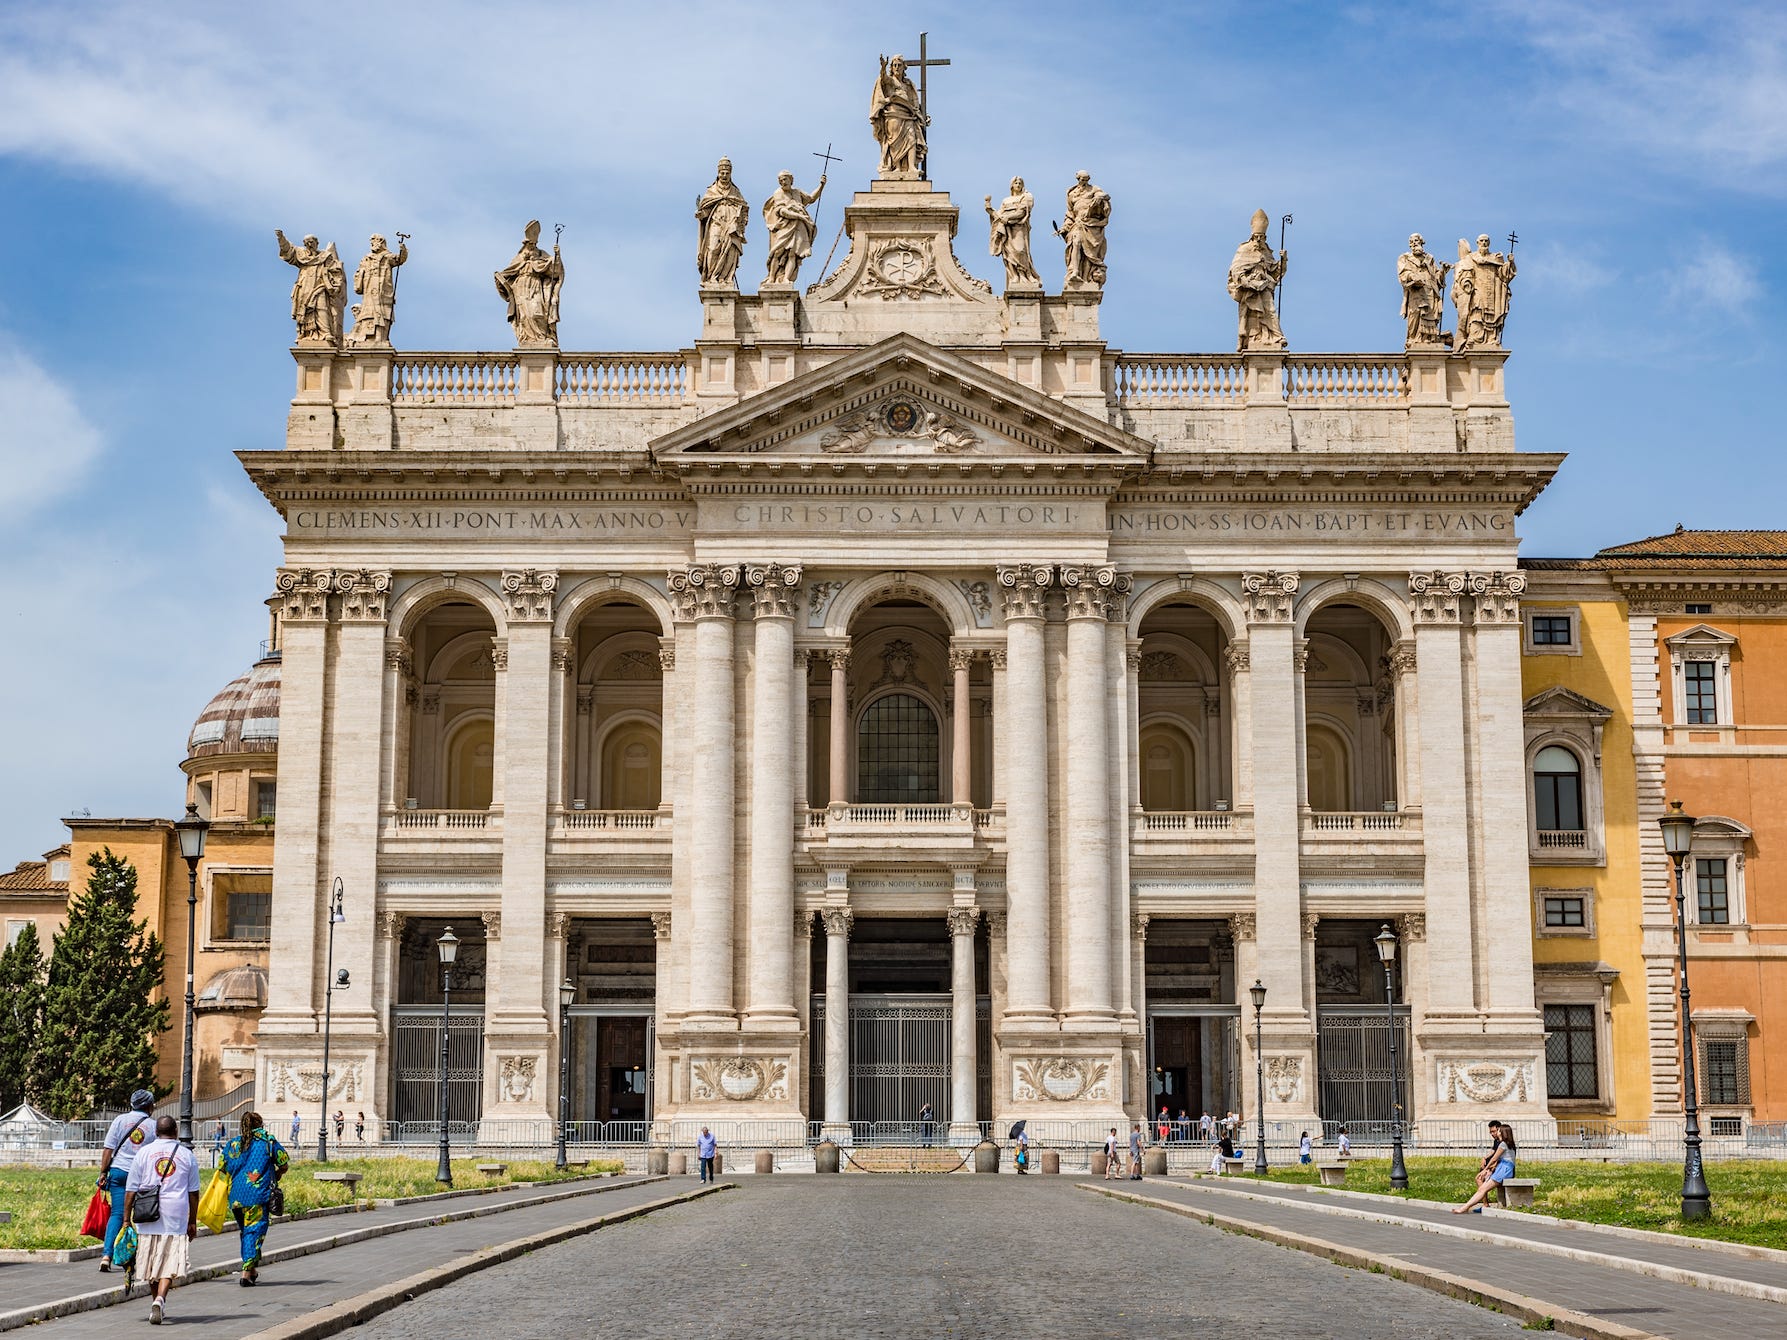 <p><span>As one of Rome's four major basilicas,</span> <span>San Giovanni in Laterano (also known as the </span>Archbasilica of St. John Lateran) <span>boasts a stunning display of baroque architecture and intricate frescoes. </span></p><p><span>It may not be as famous as some of Rome's other churches, but its grandeur and historical importance as the </span><a href="https://www.whatalifetours.com/the-four-major-papal-basilicas-of-rome/"><span>oldest papal basilica</span></a><span> in the city make it a hidden gem worth exploring.</span></p>